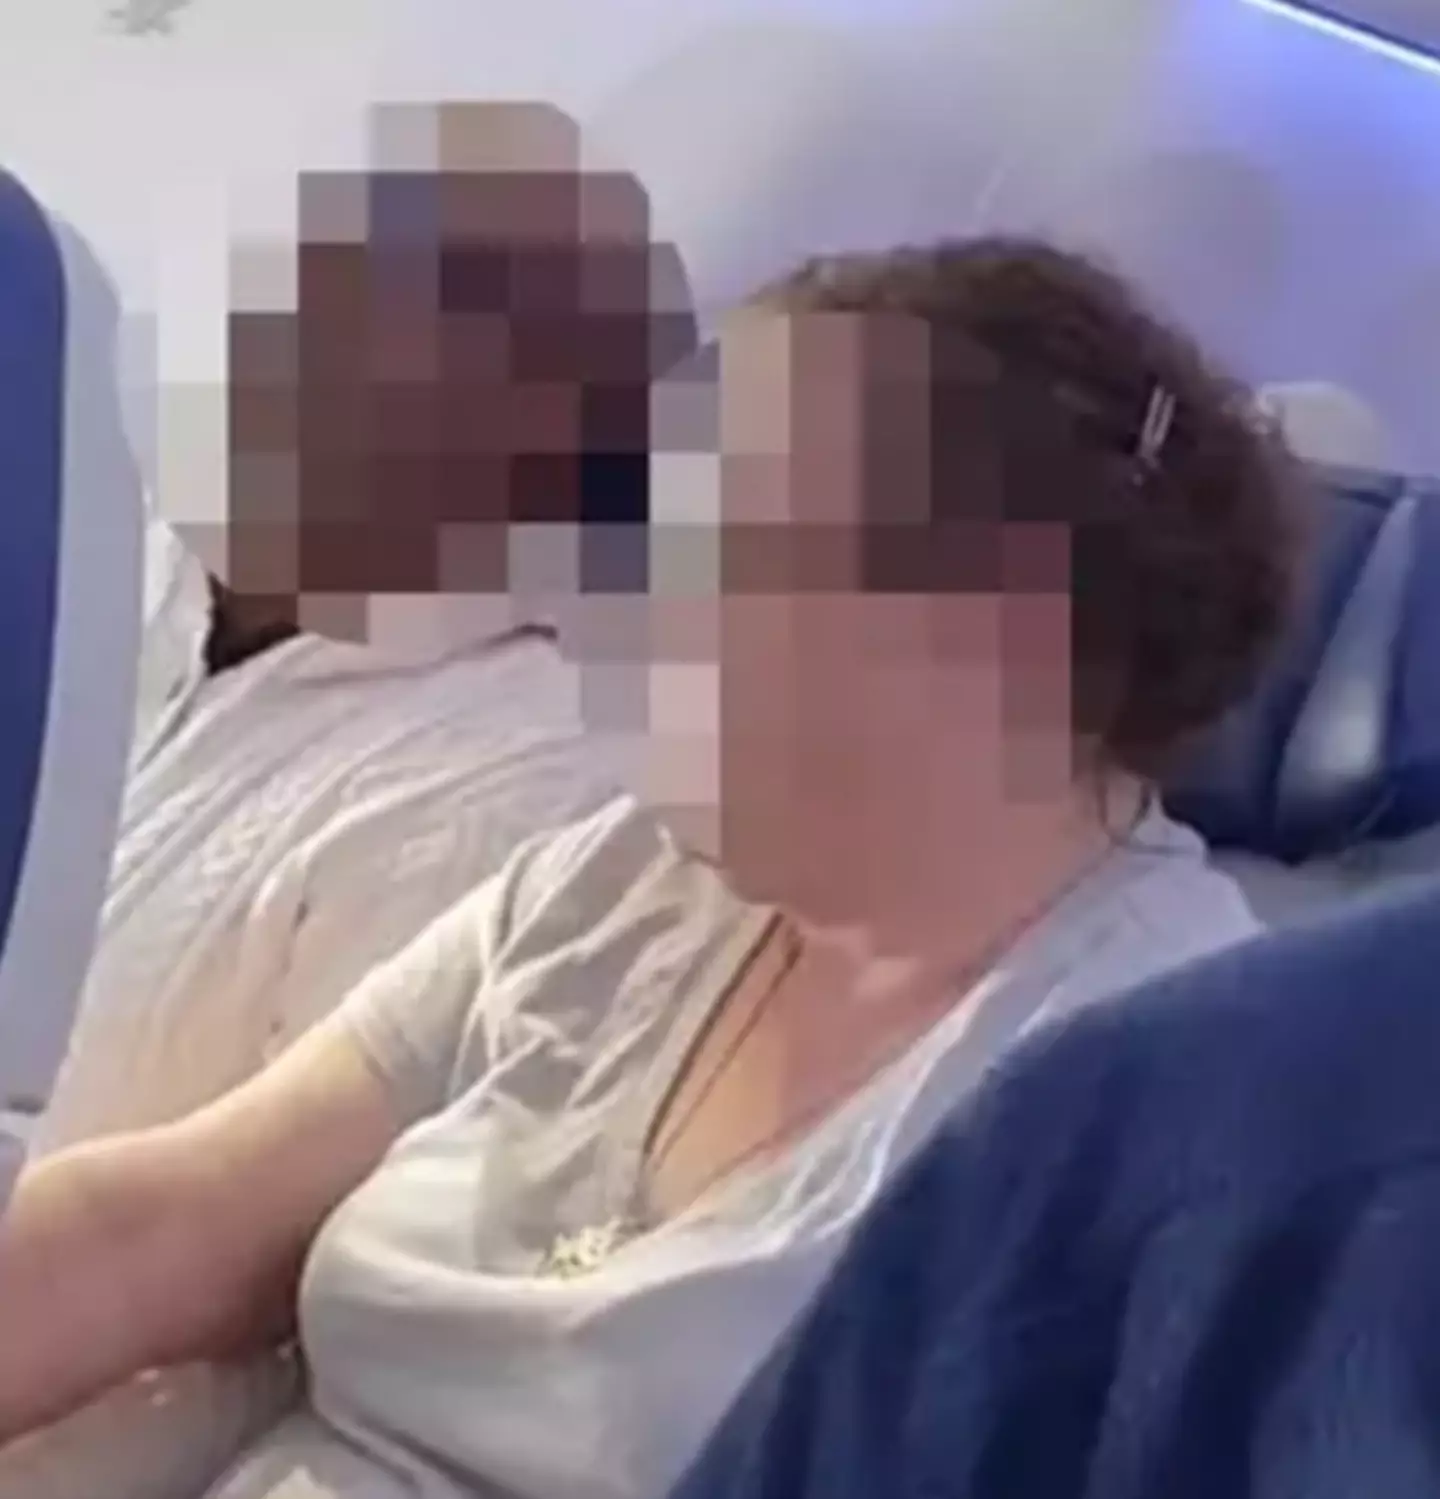 The airplane rant has gone viral online.